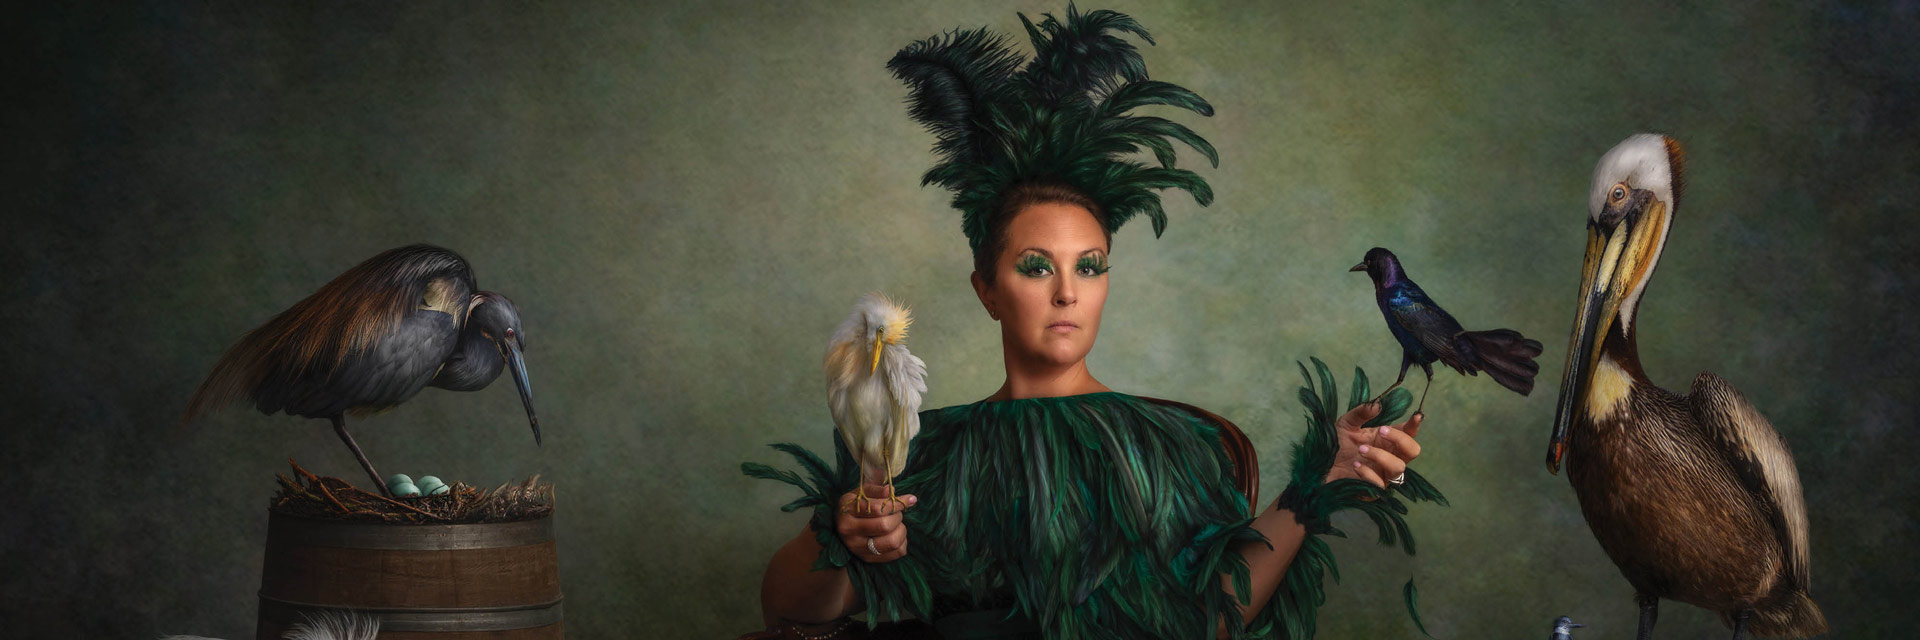 a woman in a green feathered dress holding a bird